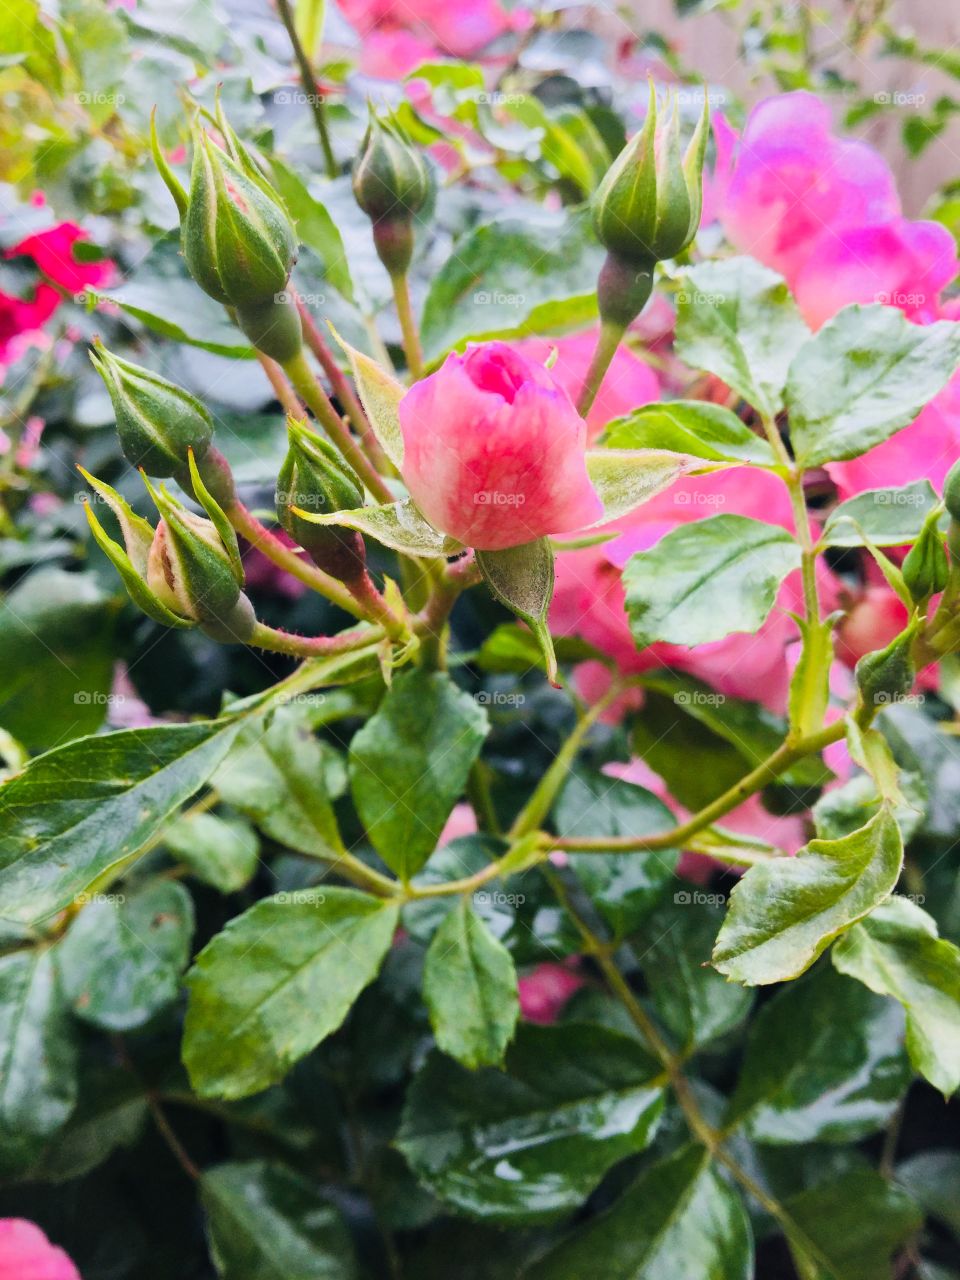 This is a photo of a bunch of rose buds. The colours are different shades of pink.